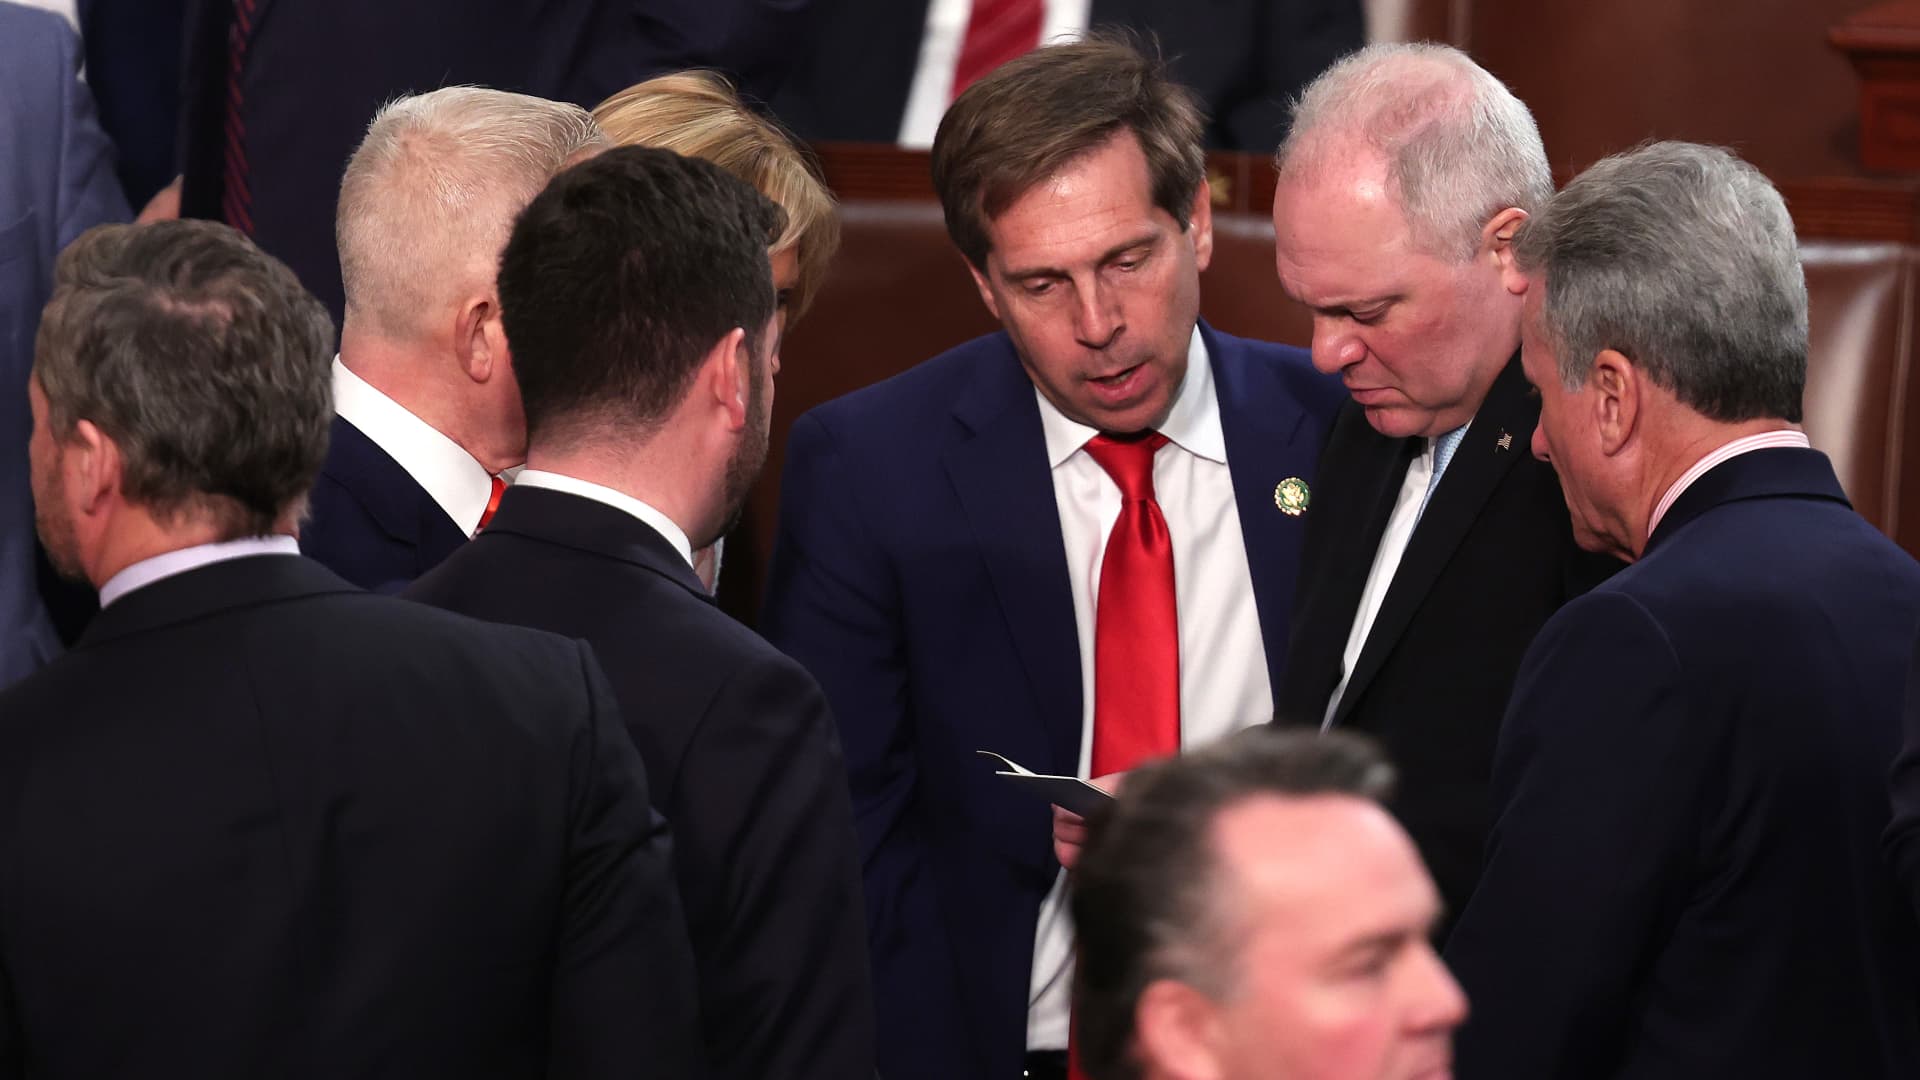 U.S. House Minority Whip Steve Scalise (R-LA) (2nd R) talks to Rep. Chuck Fleischmann (R-TN) and other Representatives as they cast their votes for Speaker of the House on the first day of the 118th Congress in the House Chamber of the U.S. Capitol Building on January 03, 2023 in Washington, DC.